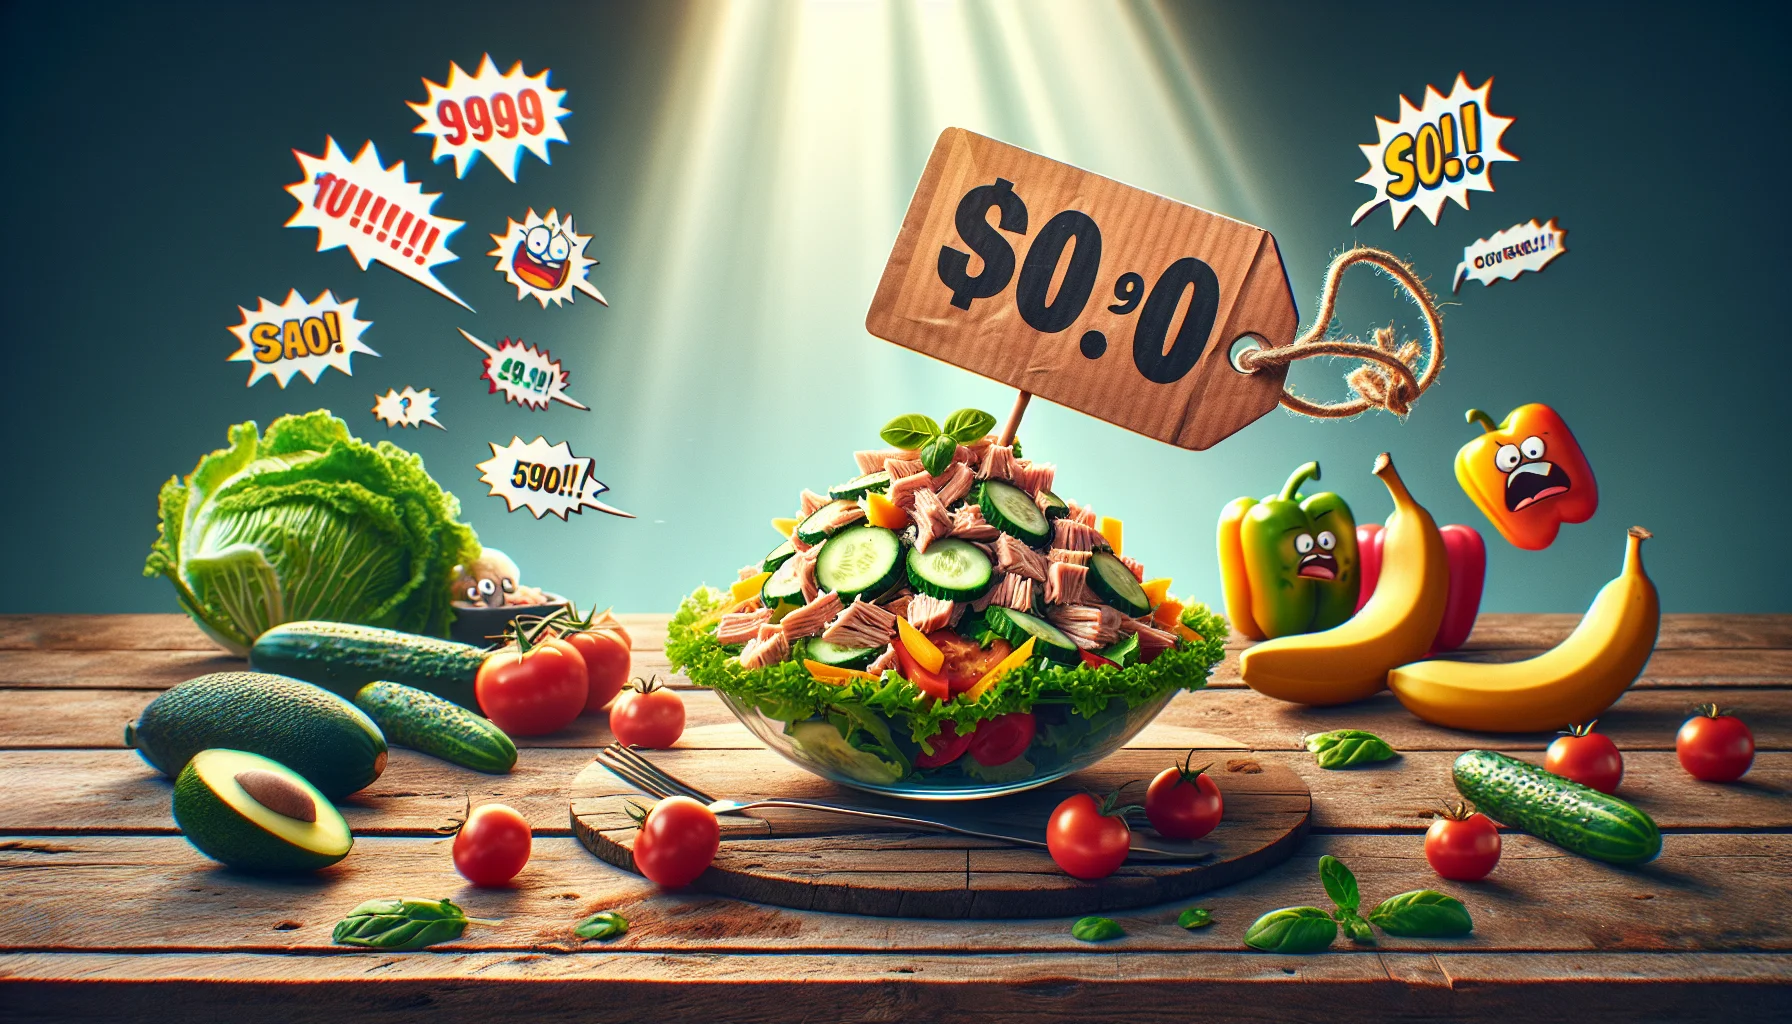 Imagine a creative and humorous scenario that promotes the affordability of healthy eating. In the spotlight is a fresh tuna salad, piled high with crisp lettuce, juicy tomatoes, and a splash of delicious dressing, placed on a rustic wooden table. Nearby, a comically large price tag marked with an unbelievably low number is waving in the breeze. Surrounding this scene are cartoon-style speech bubbles with fruits and vegetables expressing their excitement at the low-cost luxury of healthful dining, adding a touch of levity to the image. The tone should be vibrant and playful, successfully enticing people towards healthier food choices without compromising their budget.